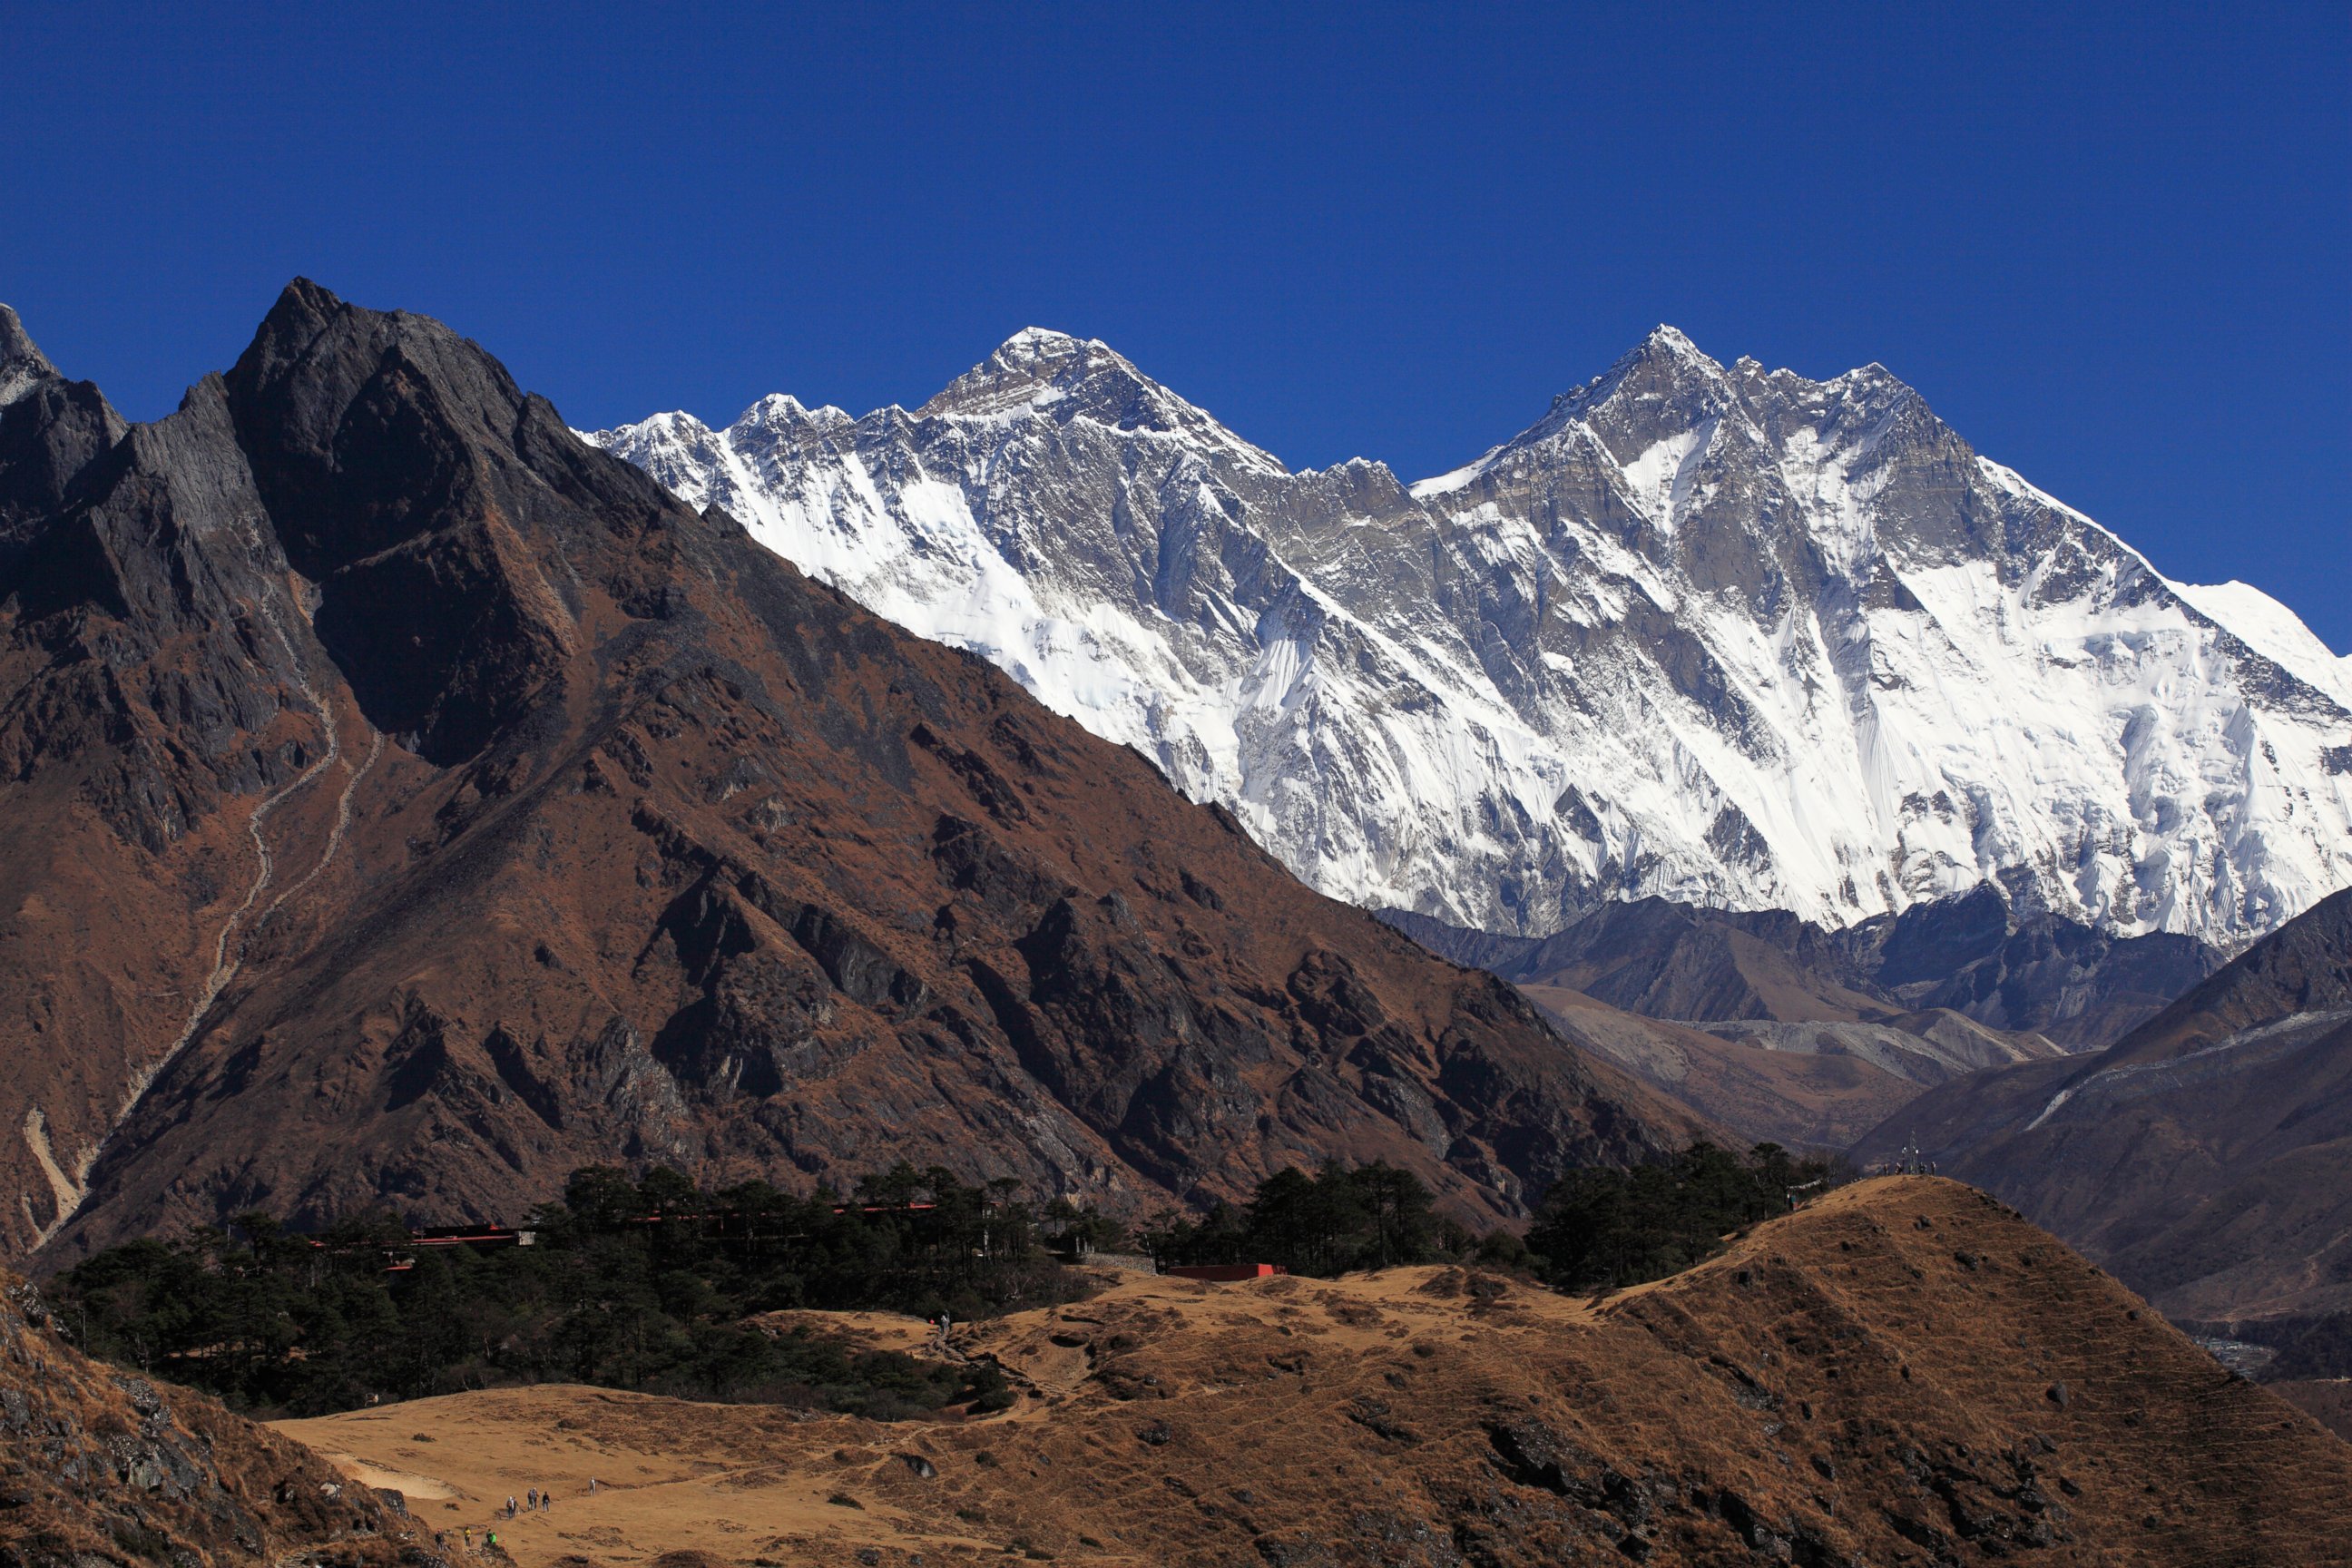 PHOTO: A view of Mount Everest and Ama Dablam from Sagarmatha National Park, Oct 30, 2012, Nepal.